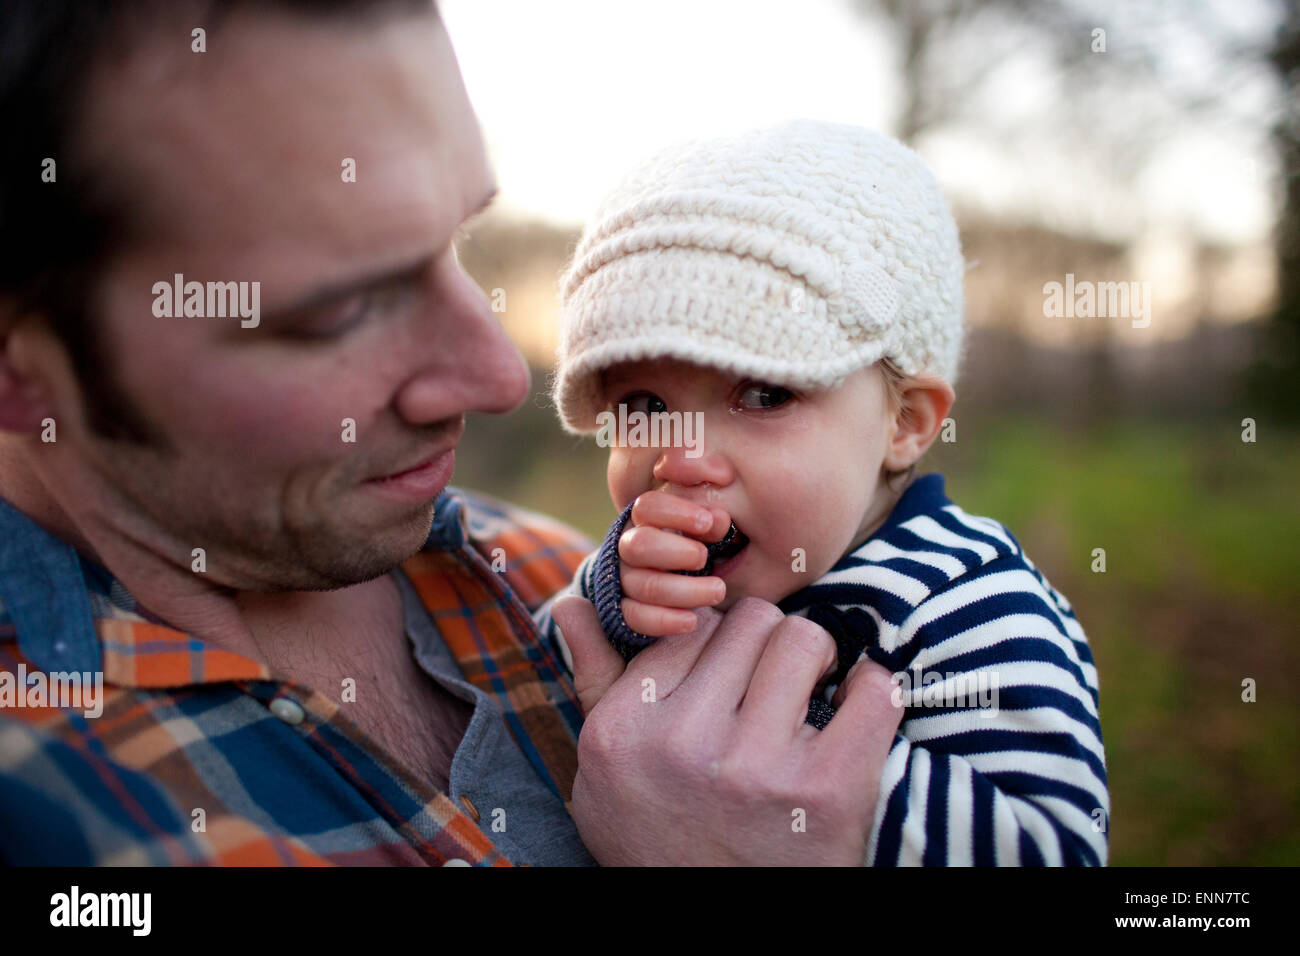 A father holds and comforts his young daughter while she cries. Stock Photo